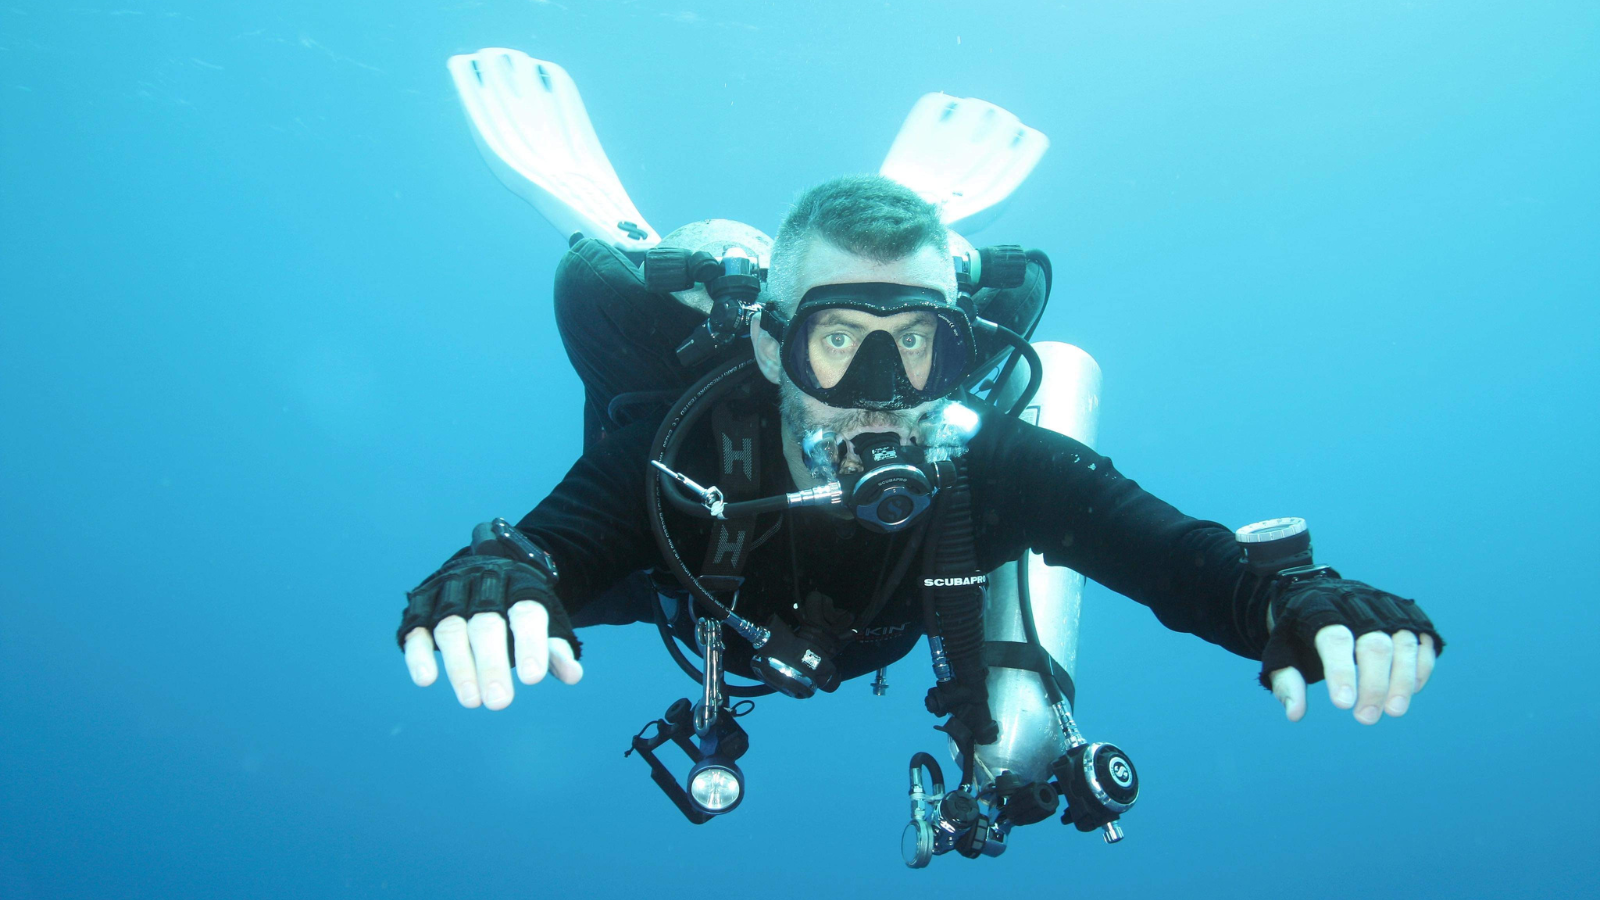 arturo marchand facing the camera underwater while scuba diving